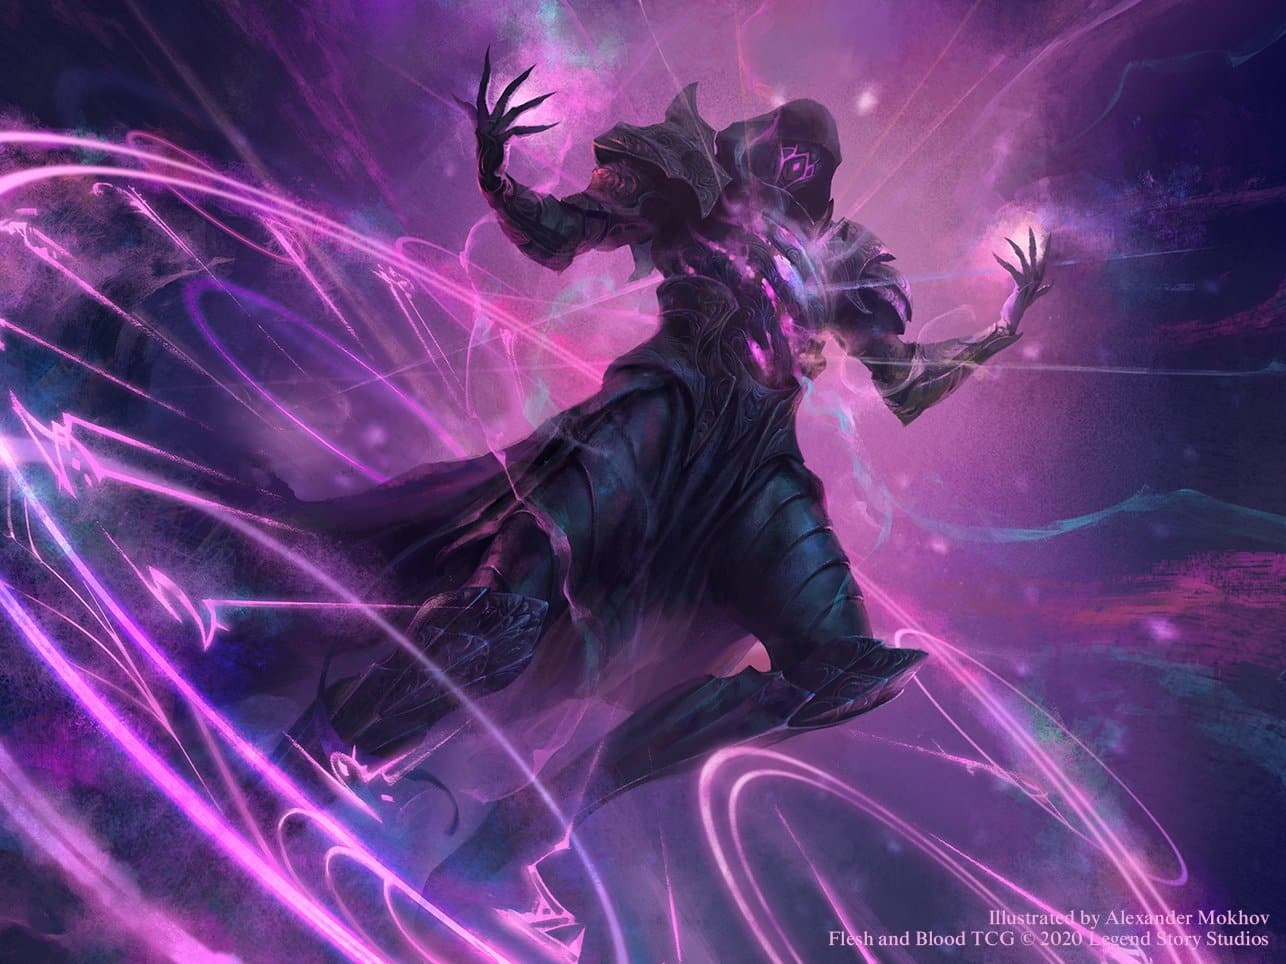 Flesh and Blood TCG Exclusive Spoiler! Blog